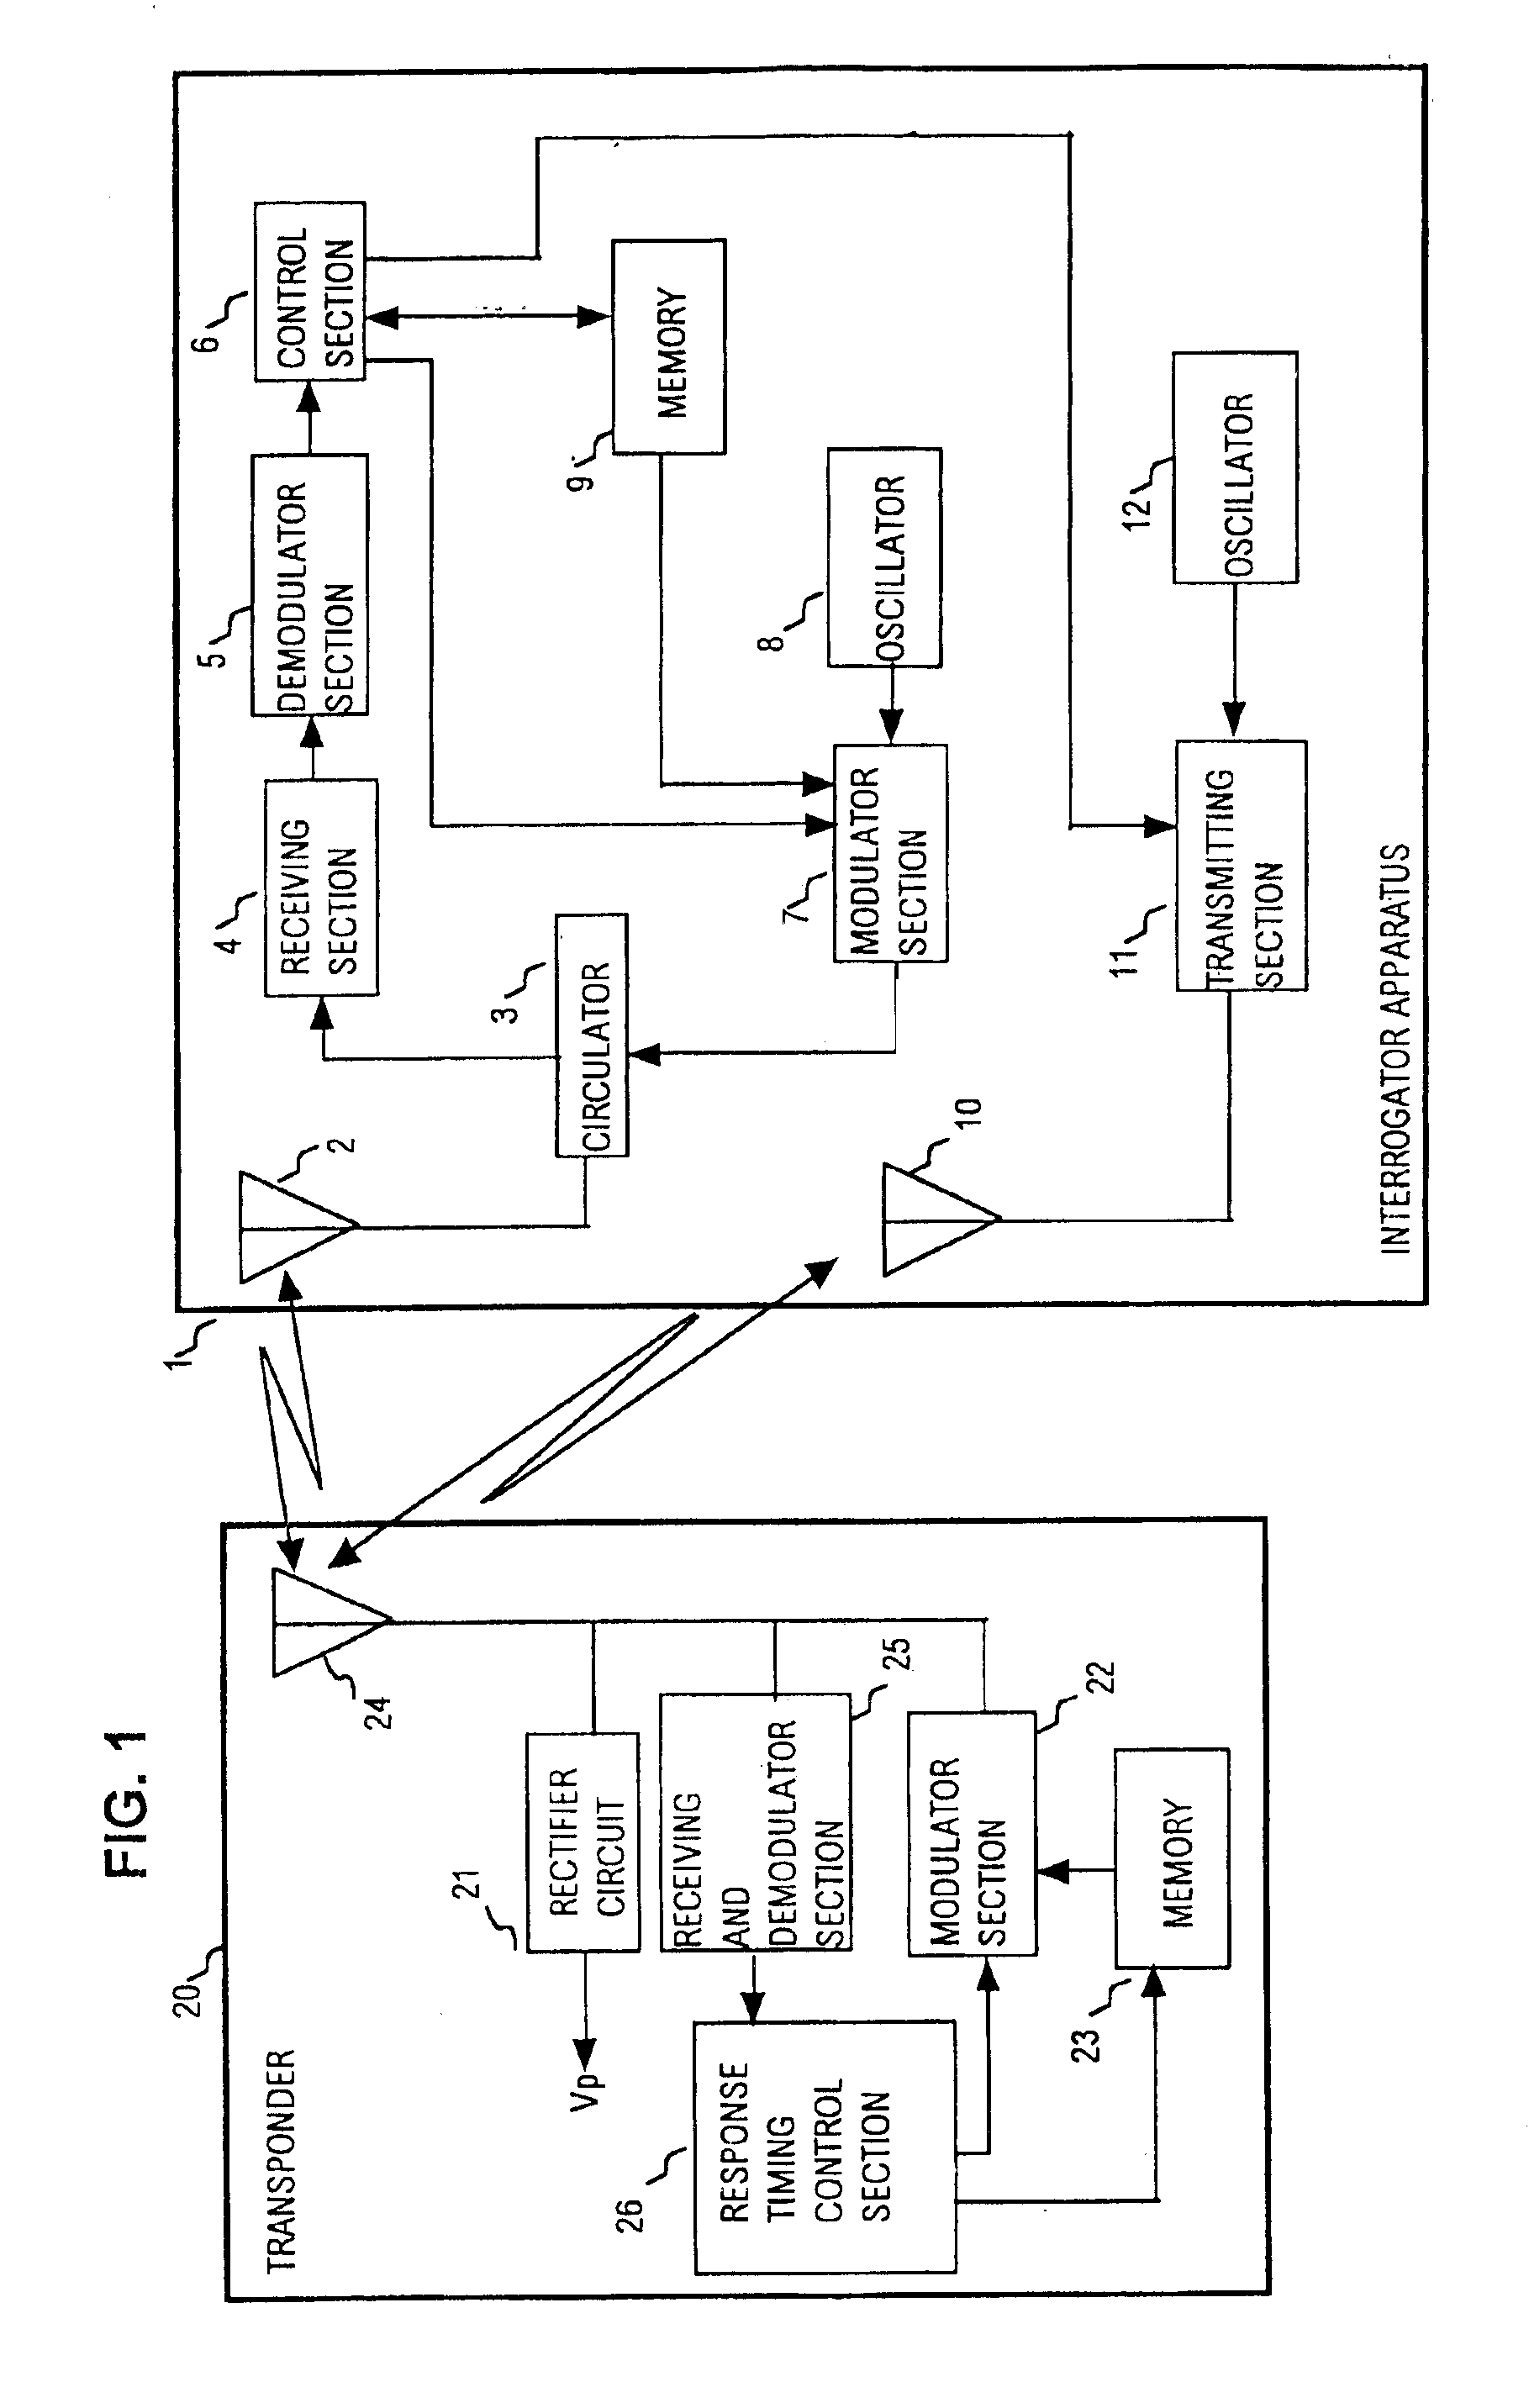 Mobile body discrimination apparatus for rapidly acquiring respective data sets transmitted through modulation of reflected radio waves by transponders which are within a communication region of an interrogator apparatus